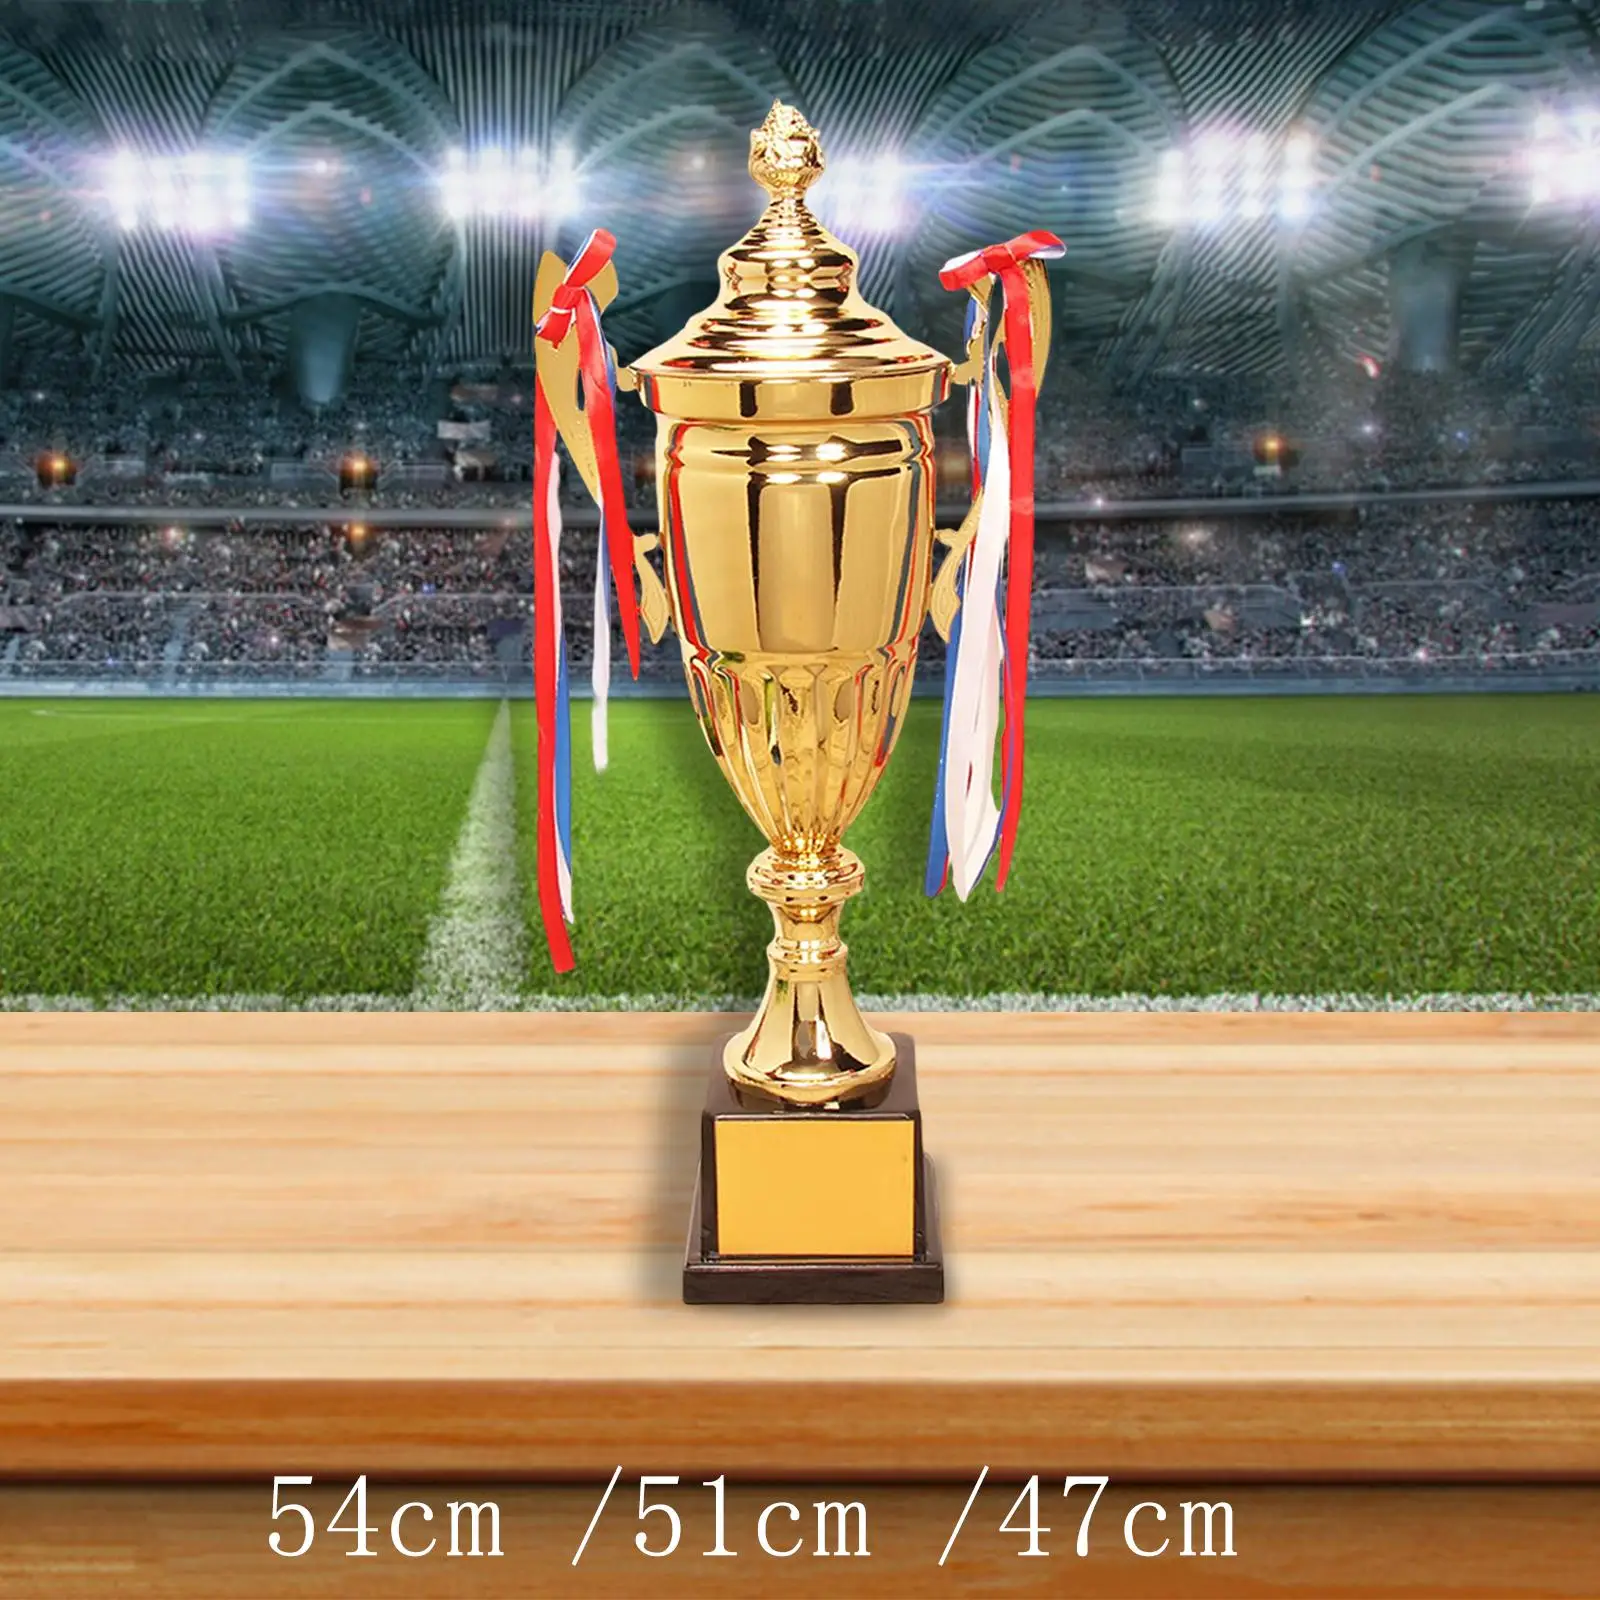 Award Trophy Large Trophy Rewards with Base for Celebrations Soccer Football League Match Tournaments Competition Party Favors